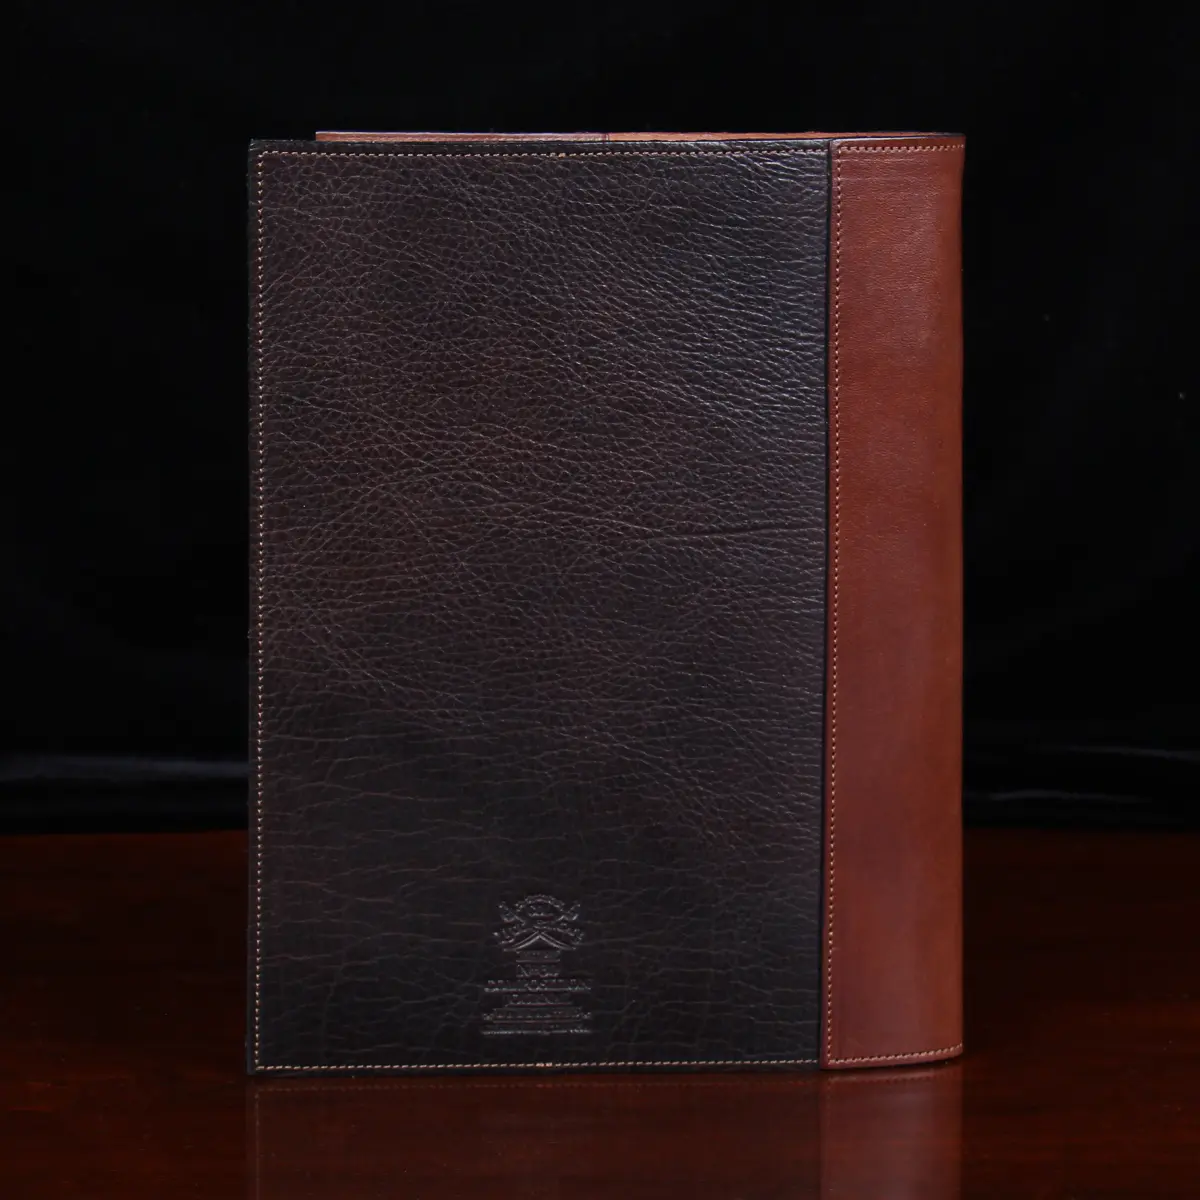 Dark drown buffalo leather composition journal cover - back view